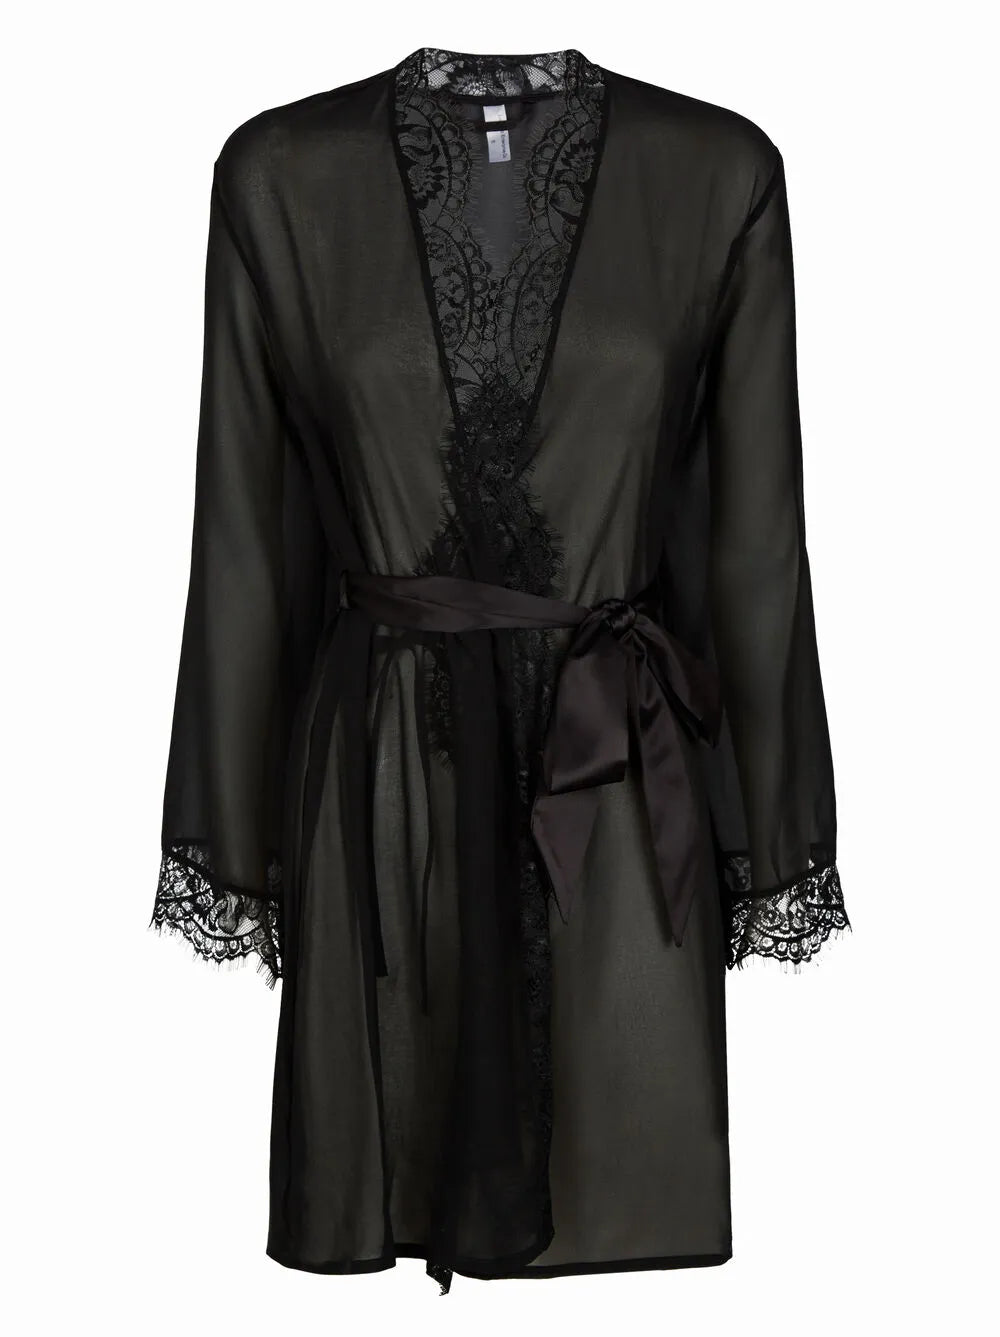 The Intrigue Robe Black